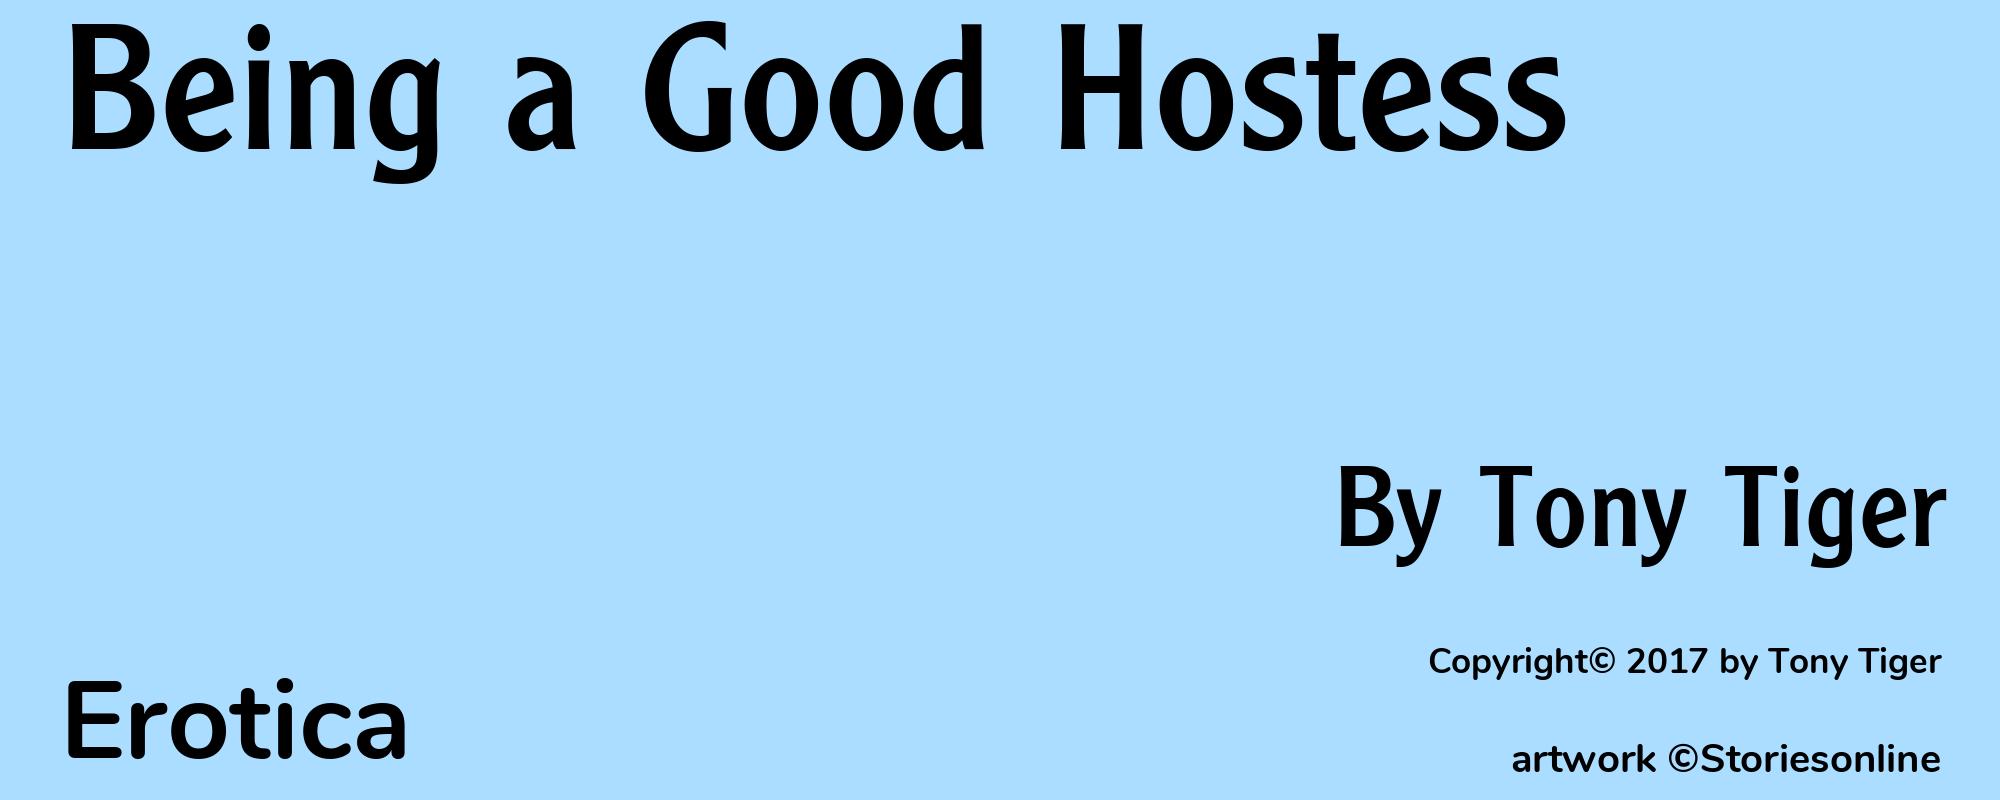 Being a Good Hostess - Cover